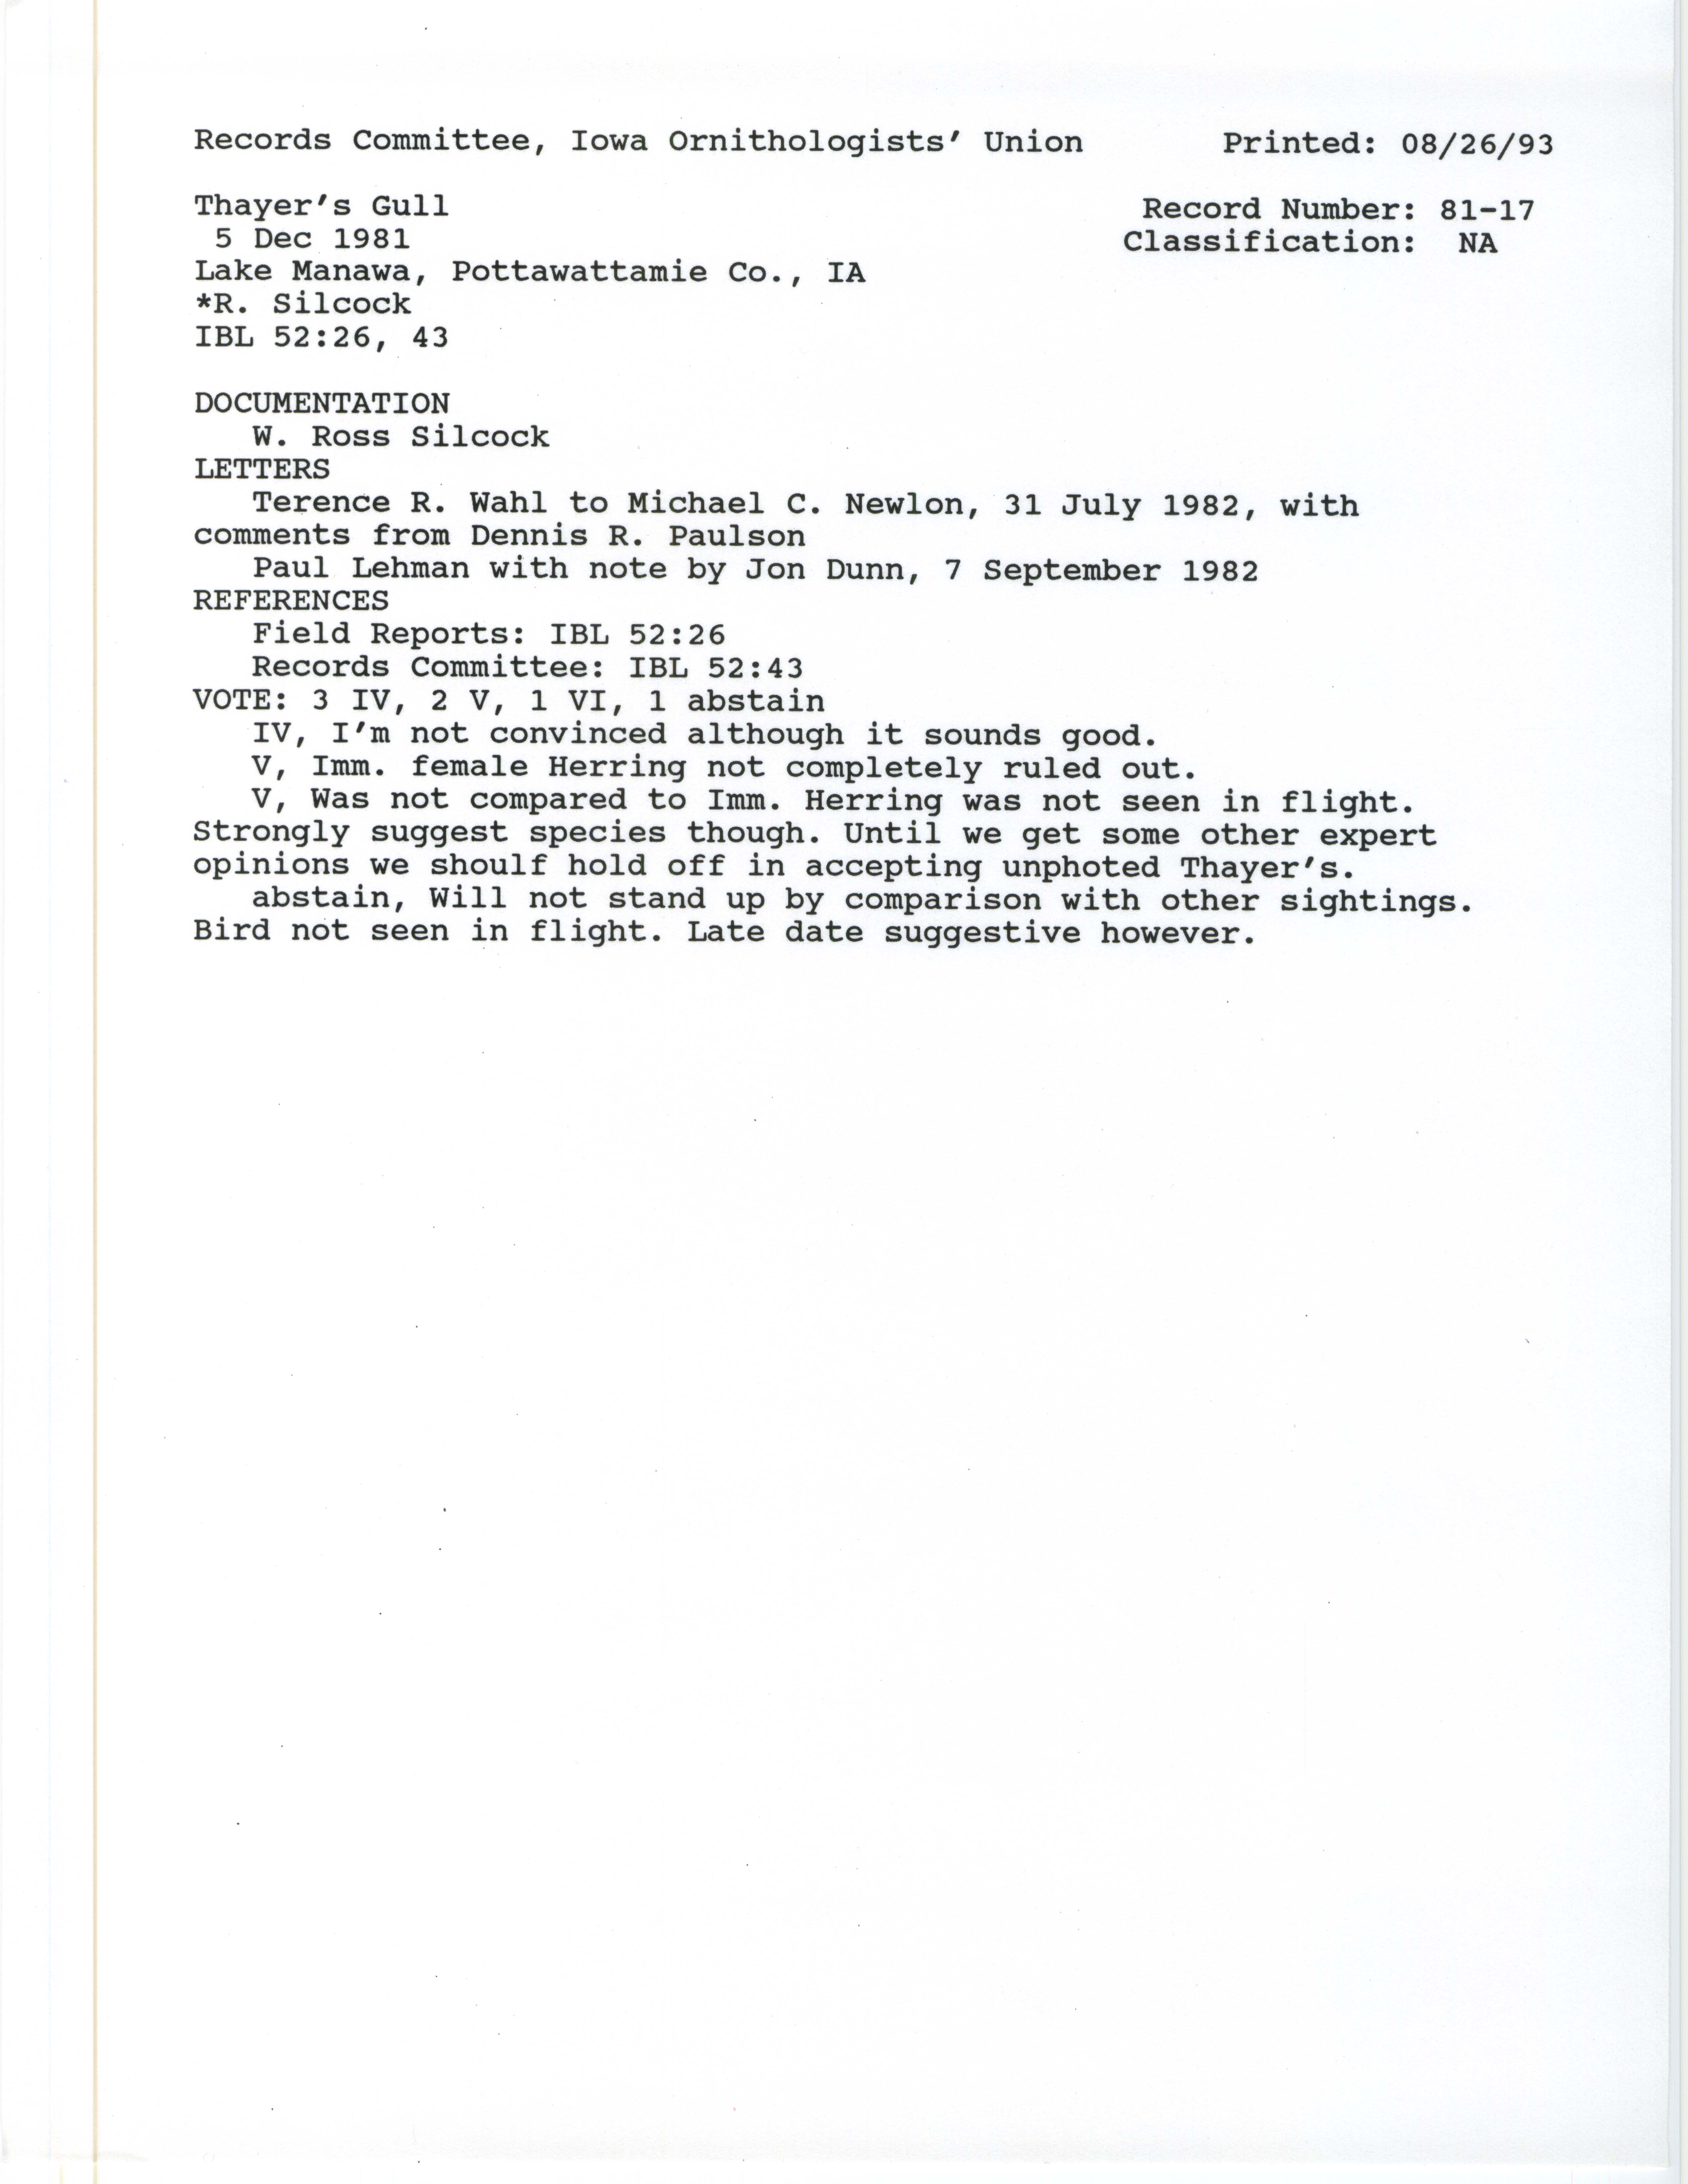 Records Committee review for rare bird sighting of Thayer's Gull at Lake Manawa, 1981